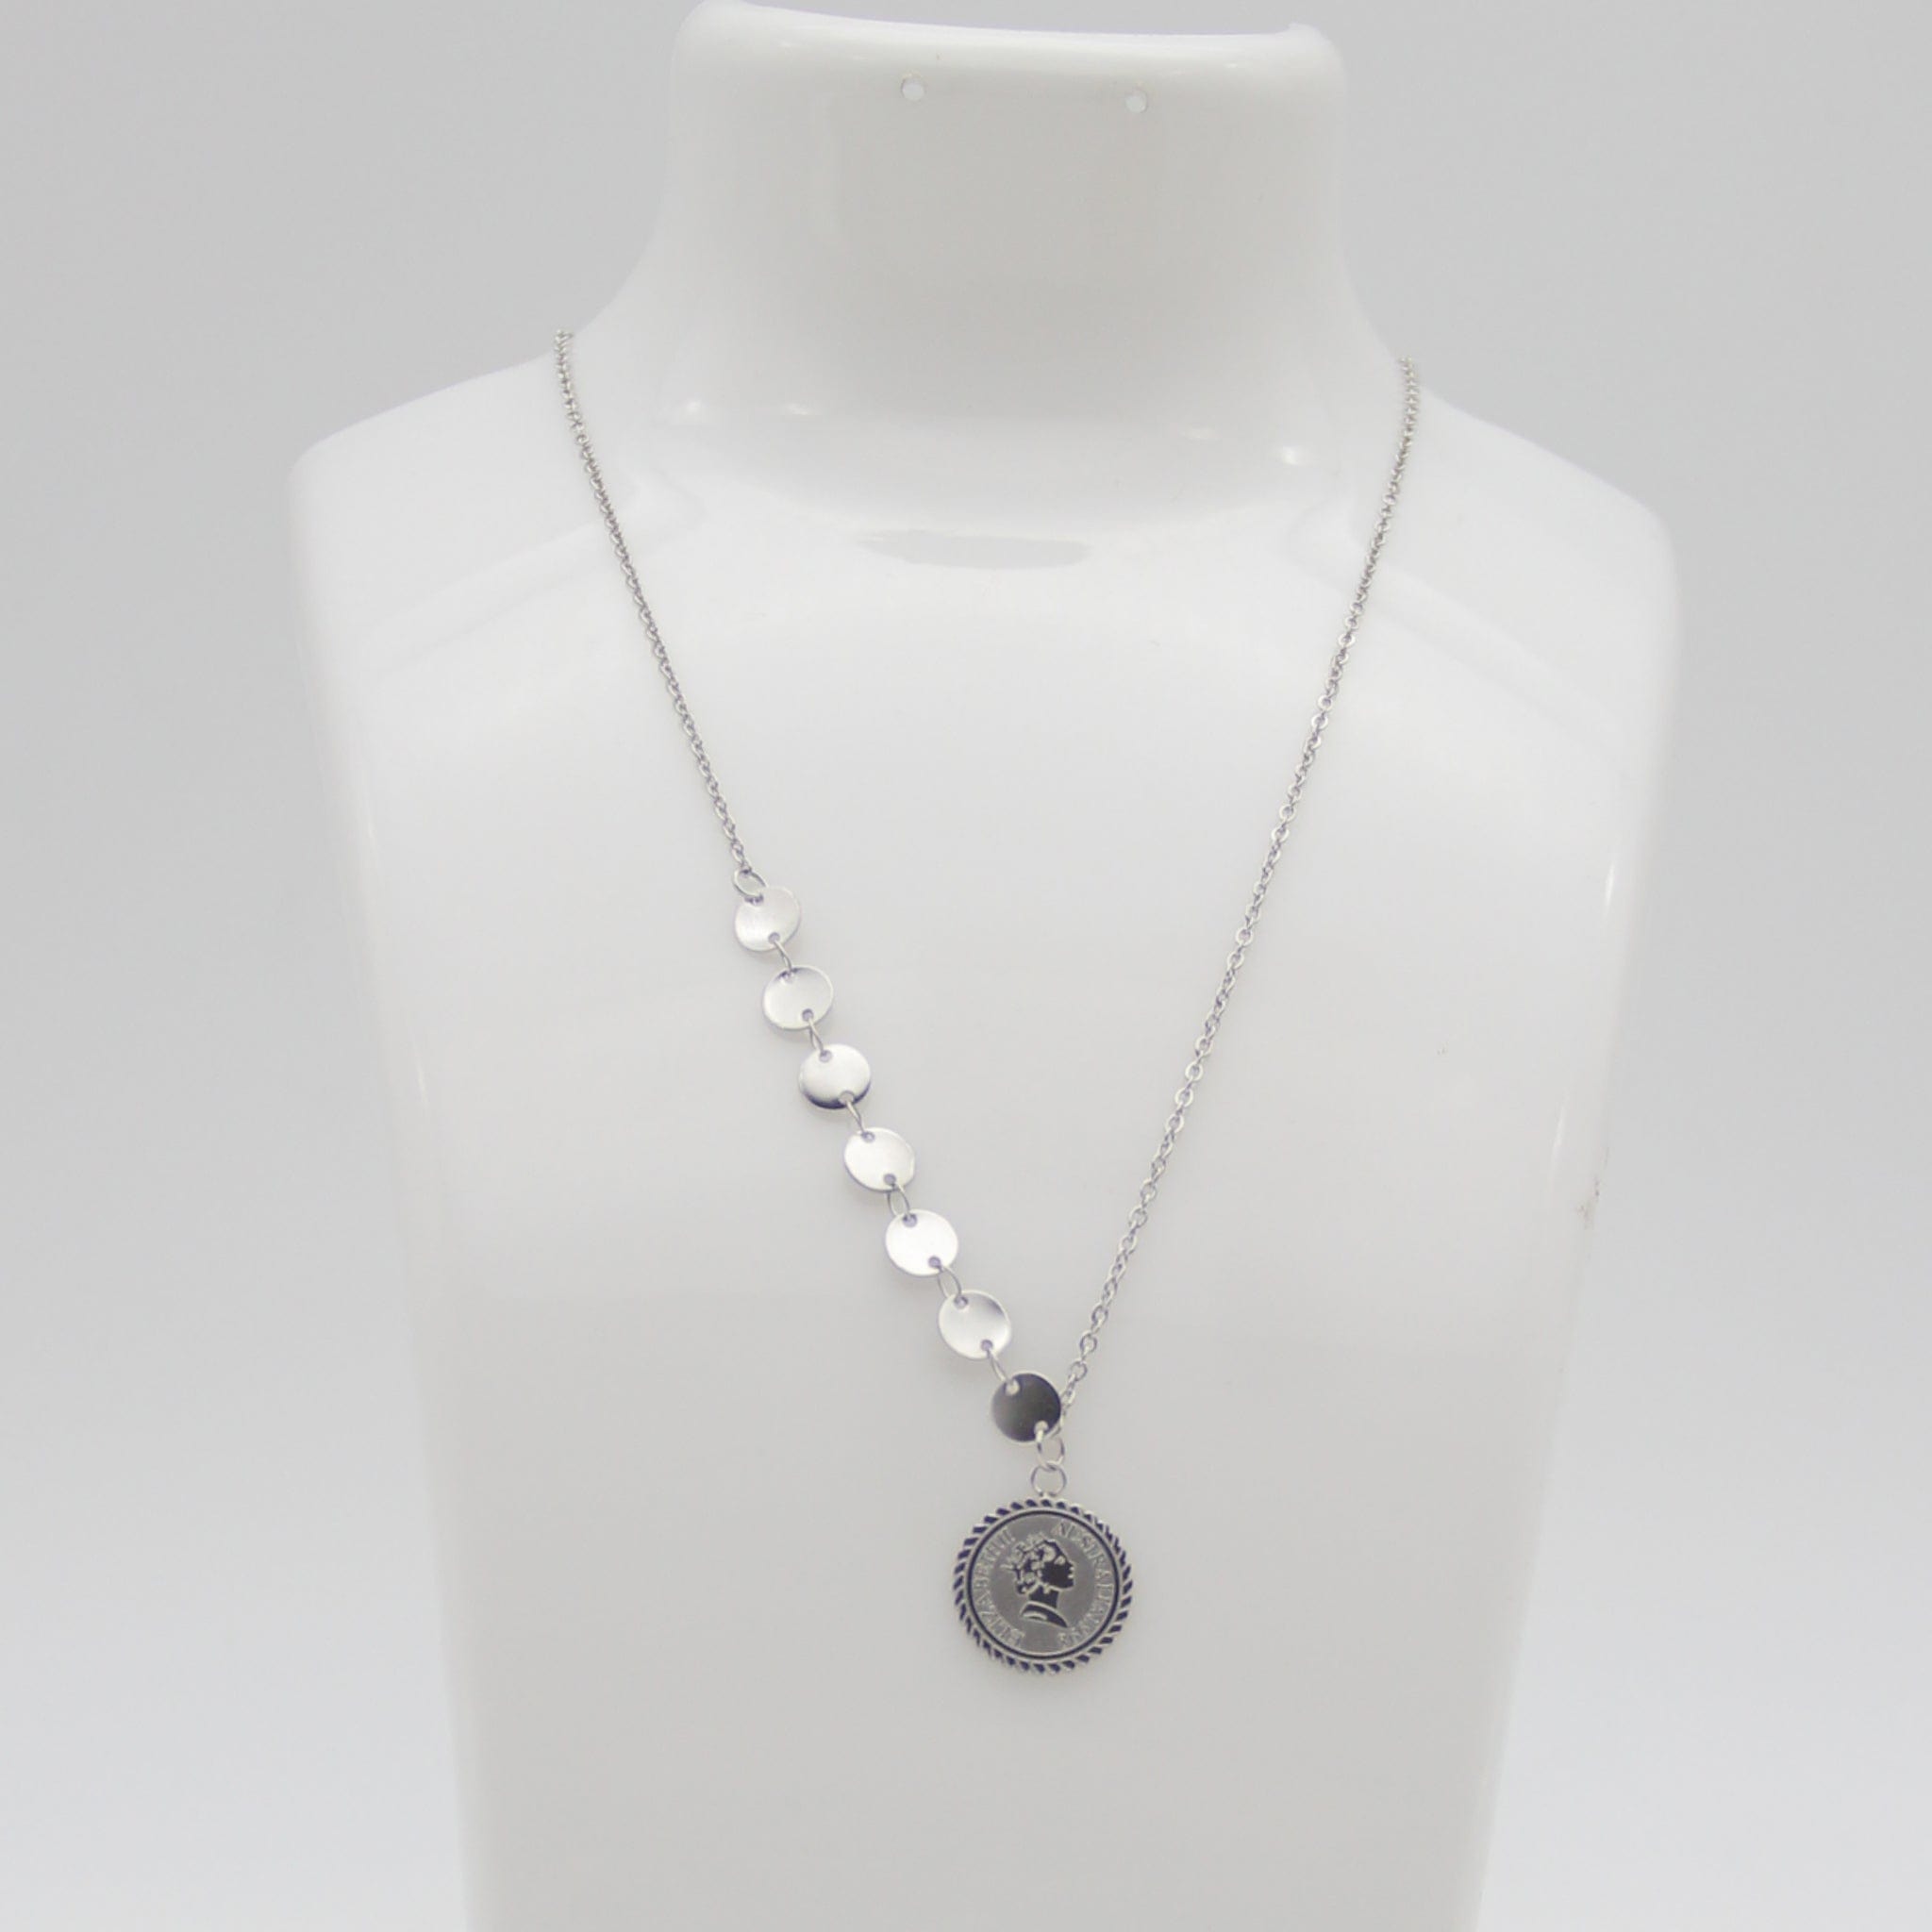 Outlet W&B Female Necklaces Queen Label Silvered Stainless Steel Necklace